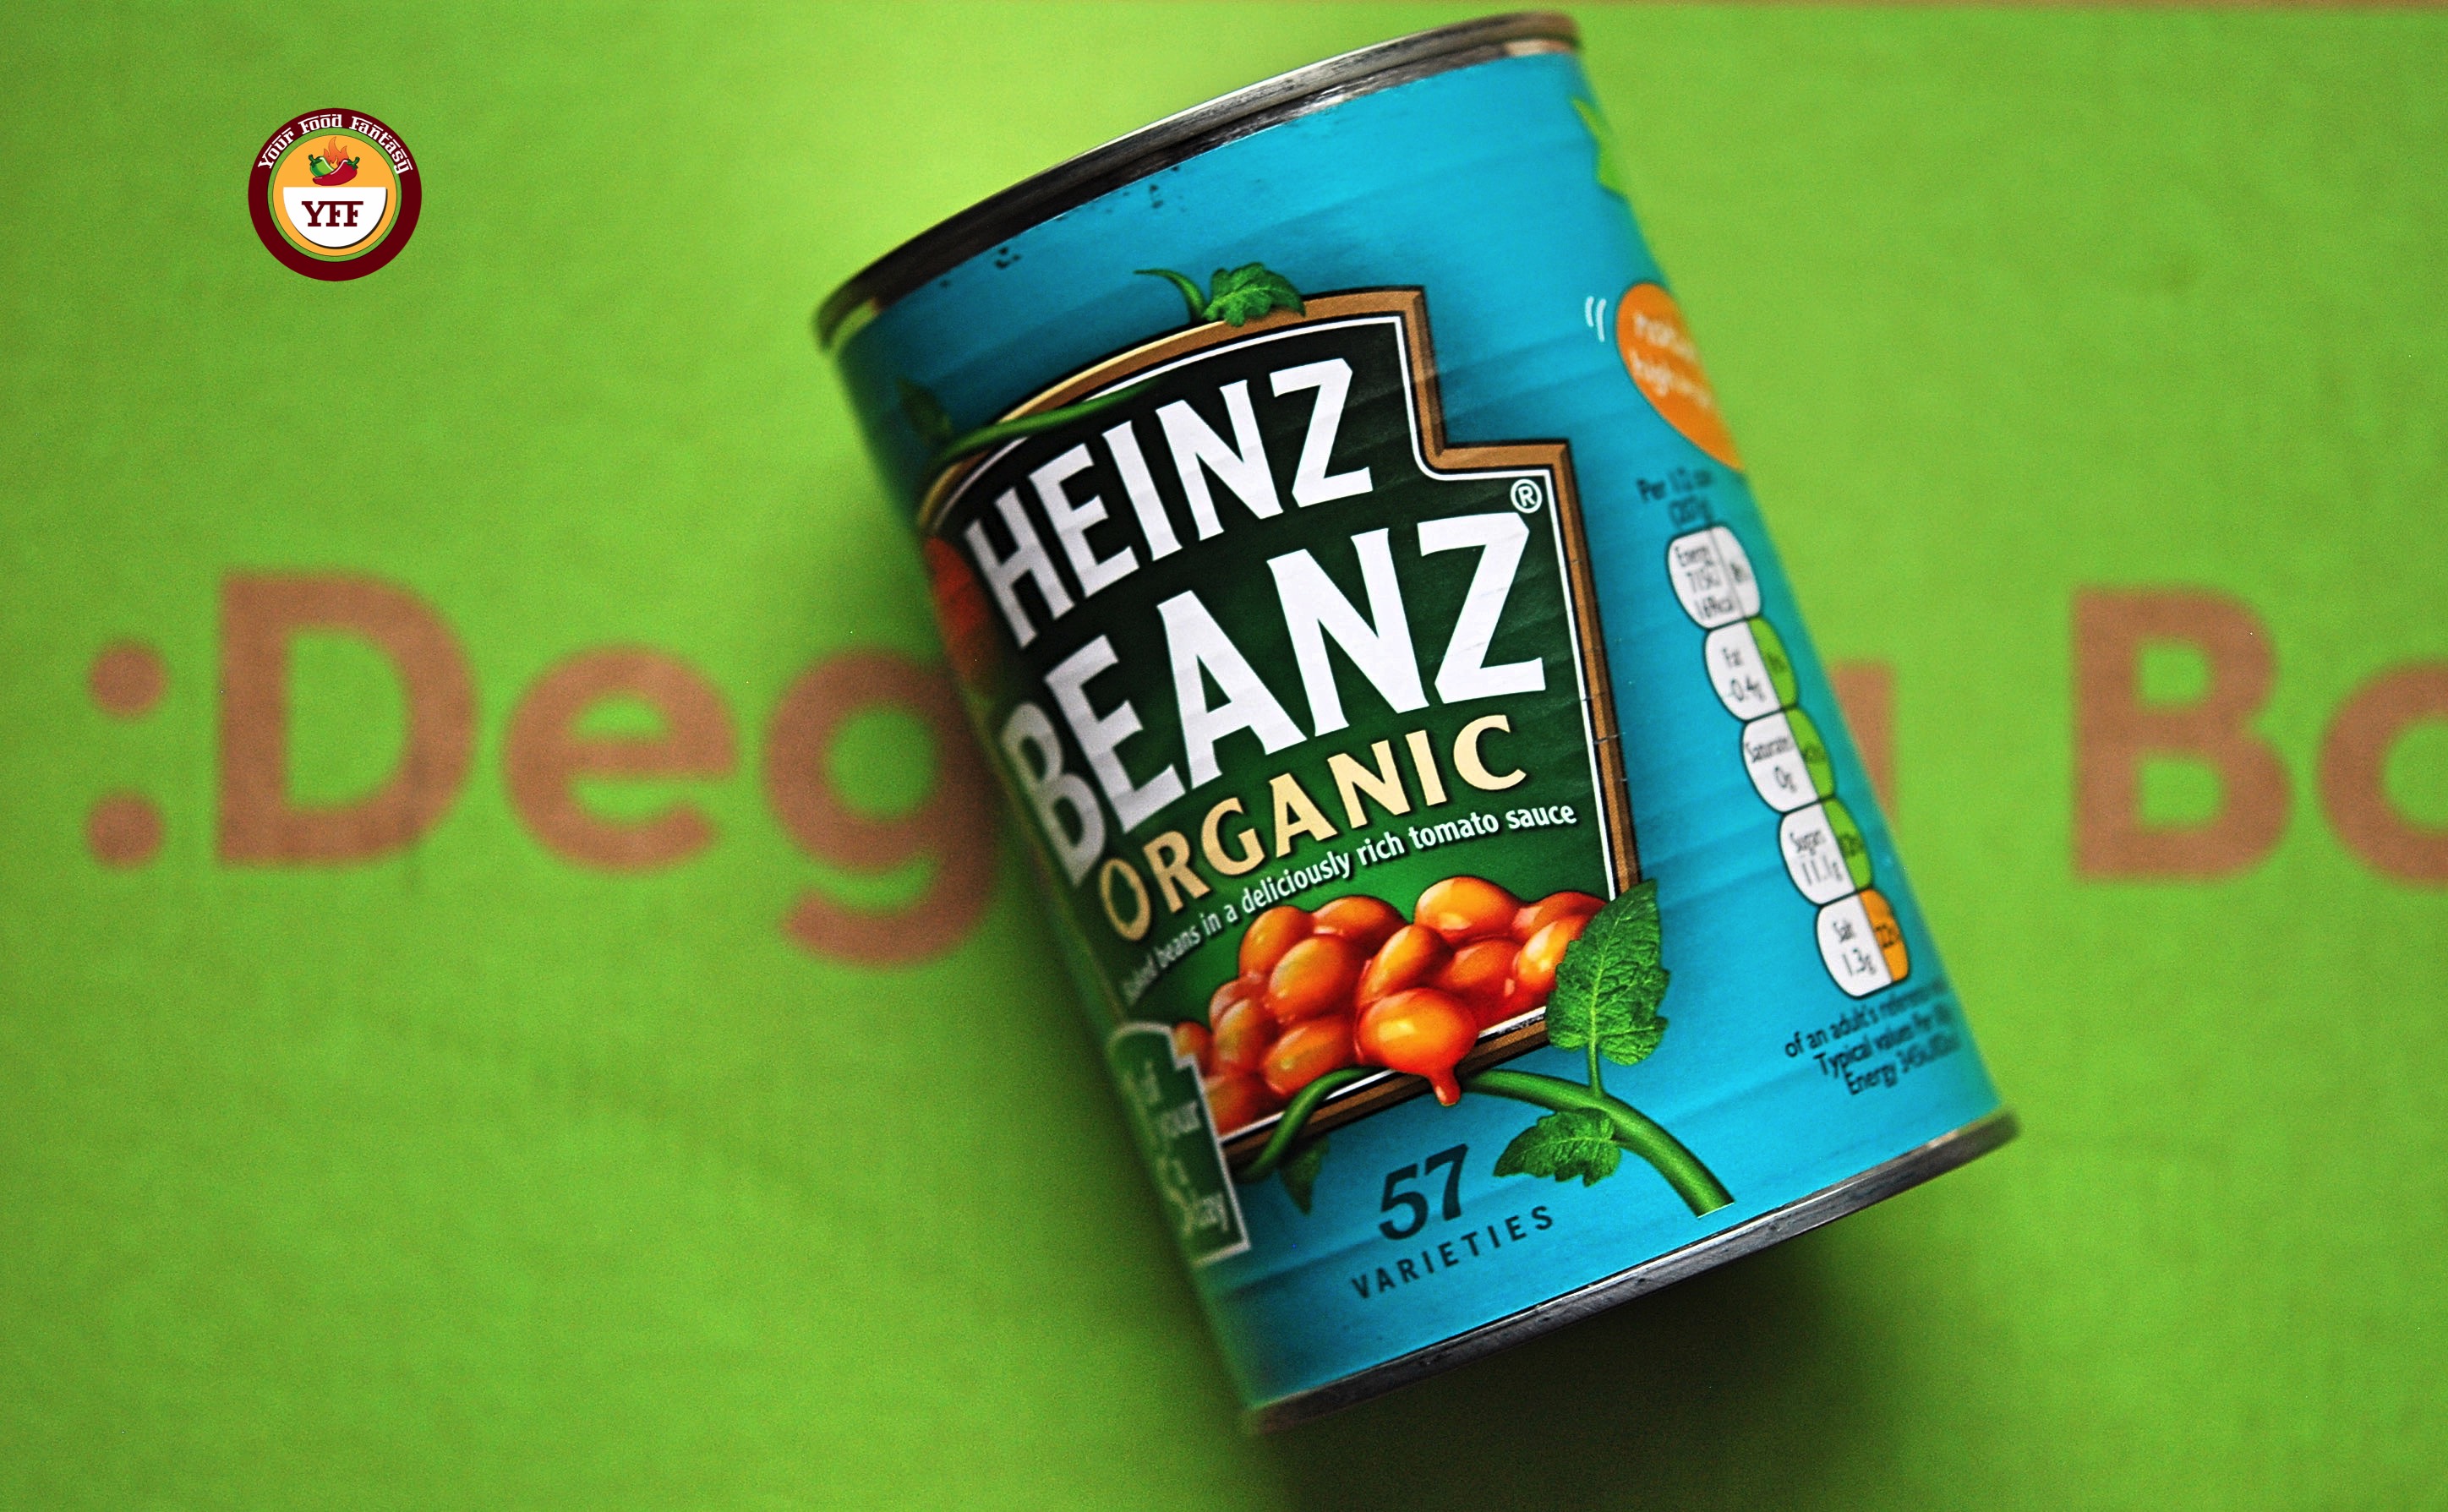 Heinz Baked Beanz review by Your Food Fantasy